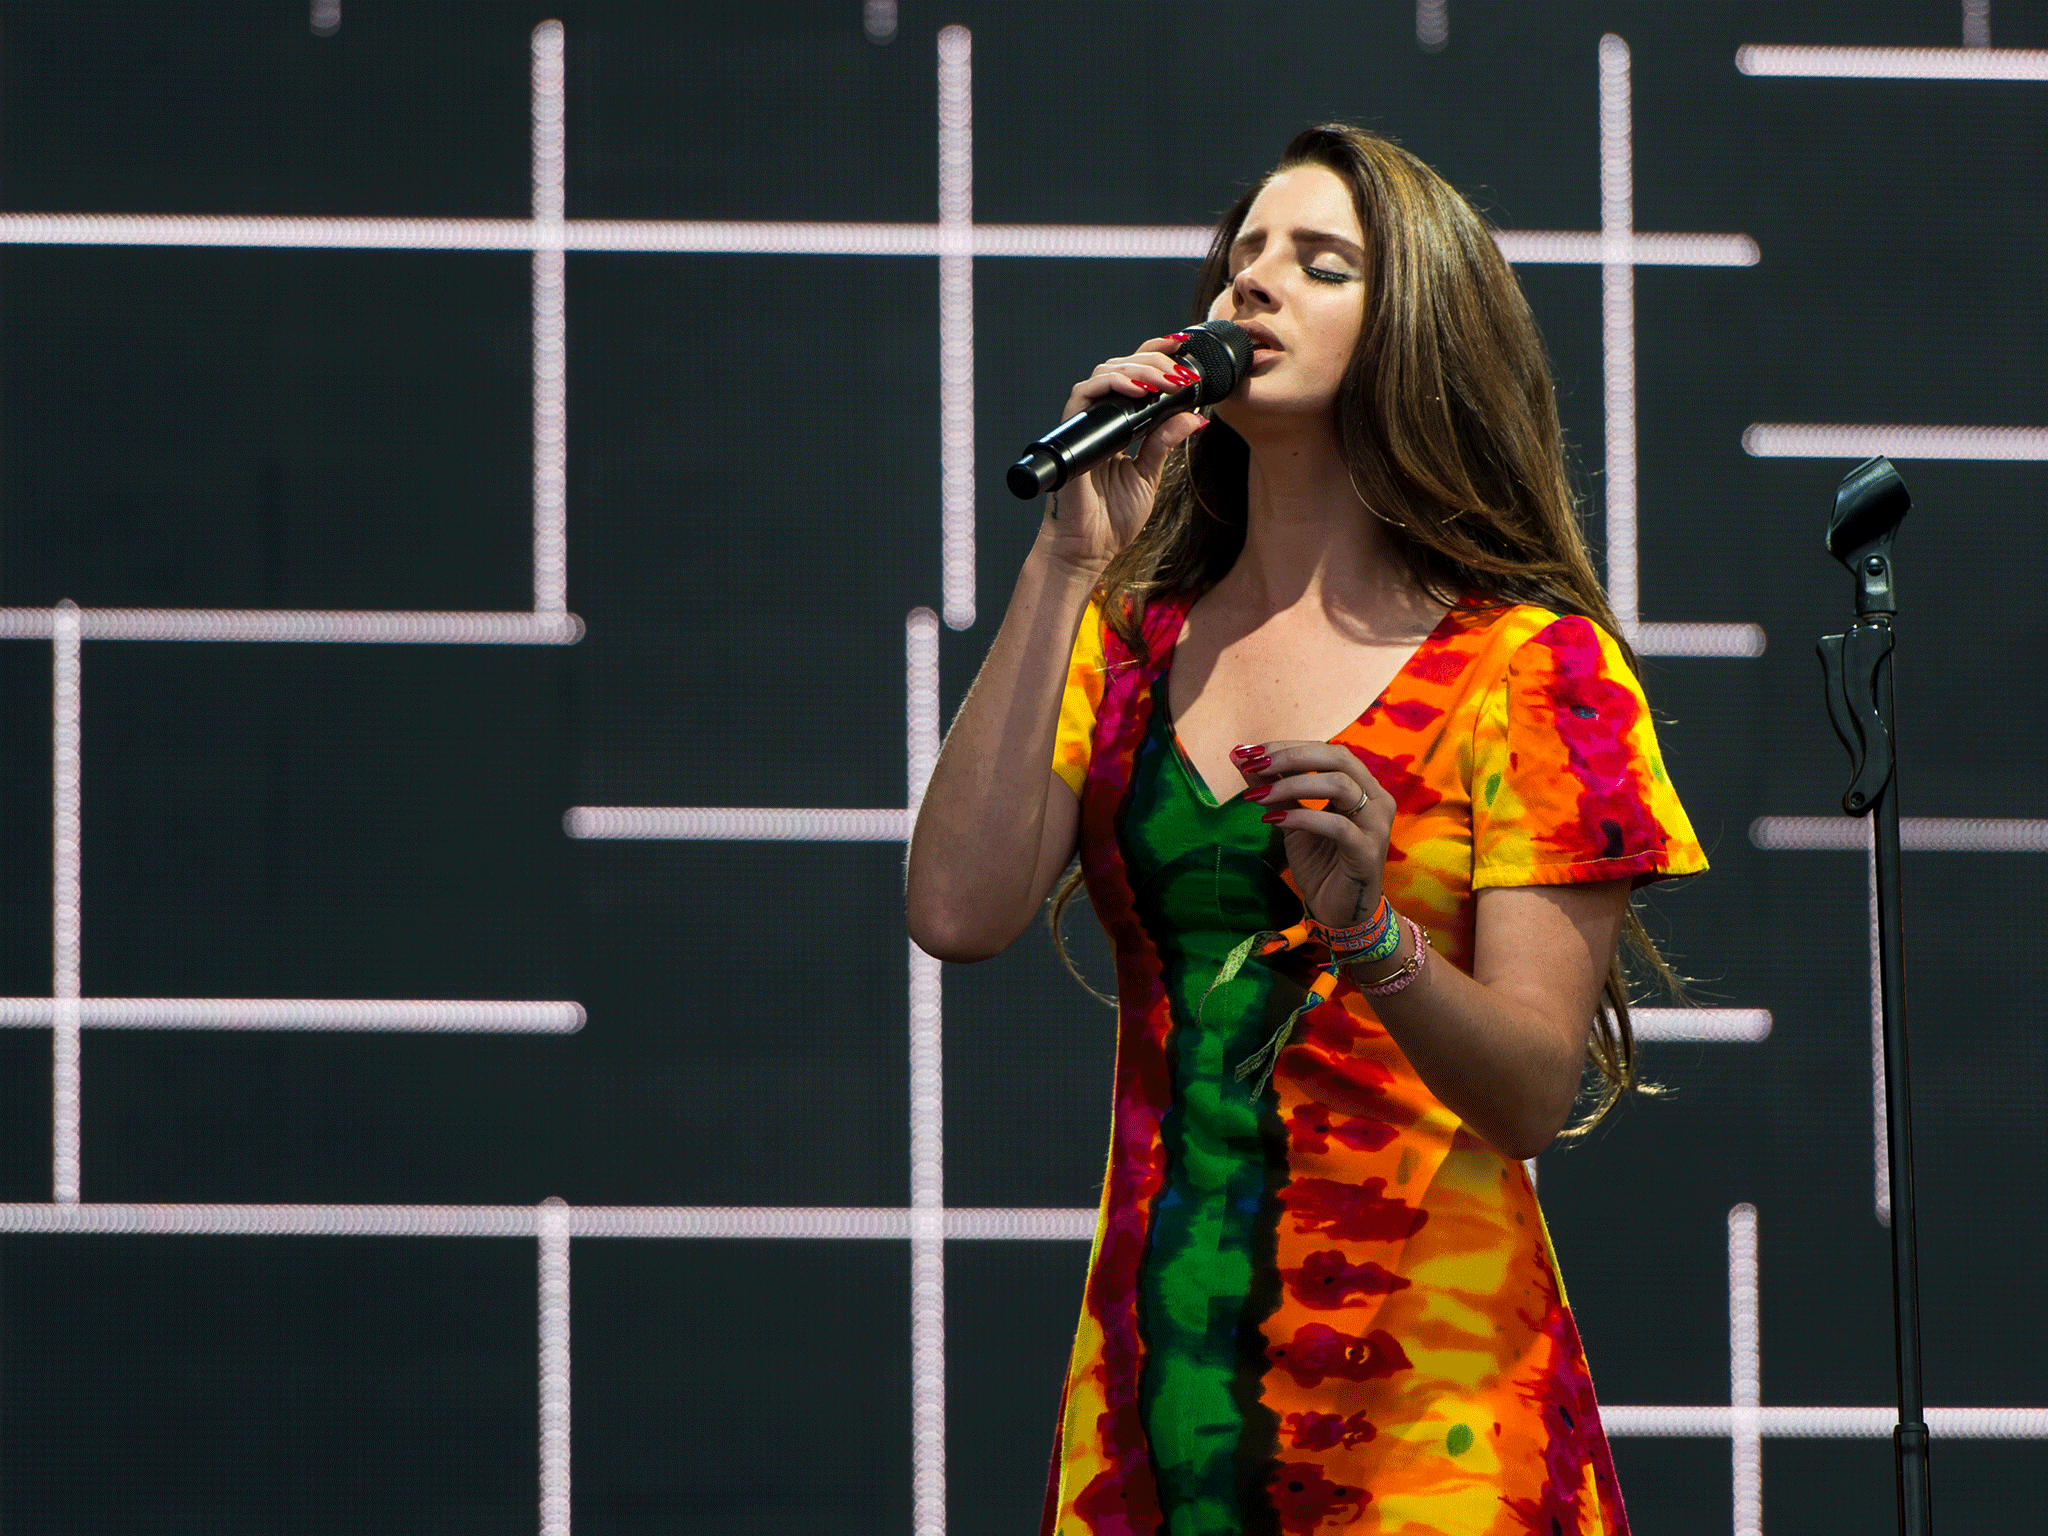 Lana del Rey performs on the Pyramid Stage during Day 2 of the Glastonbury Festival at Worthy Farm on June 28, 2014 in Glastonbury, England.